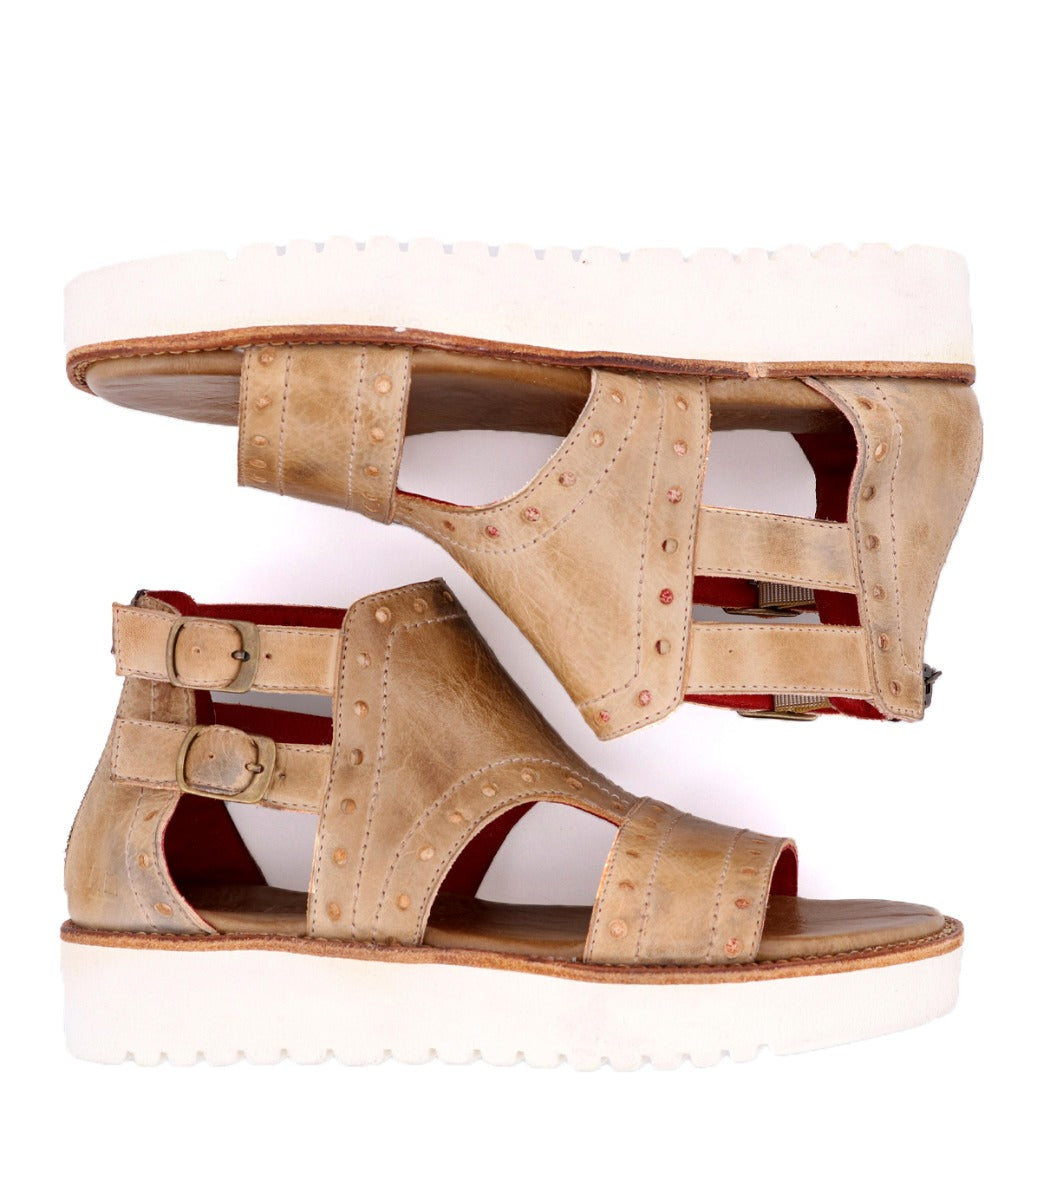 A pair of Bed Stu Camden women's sandals in tan leather.